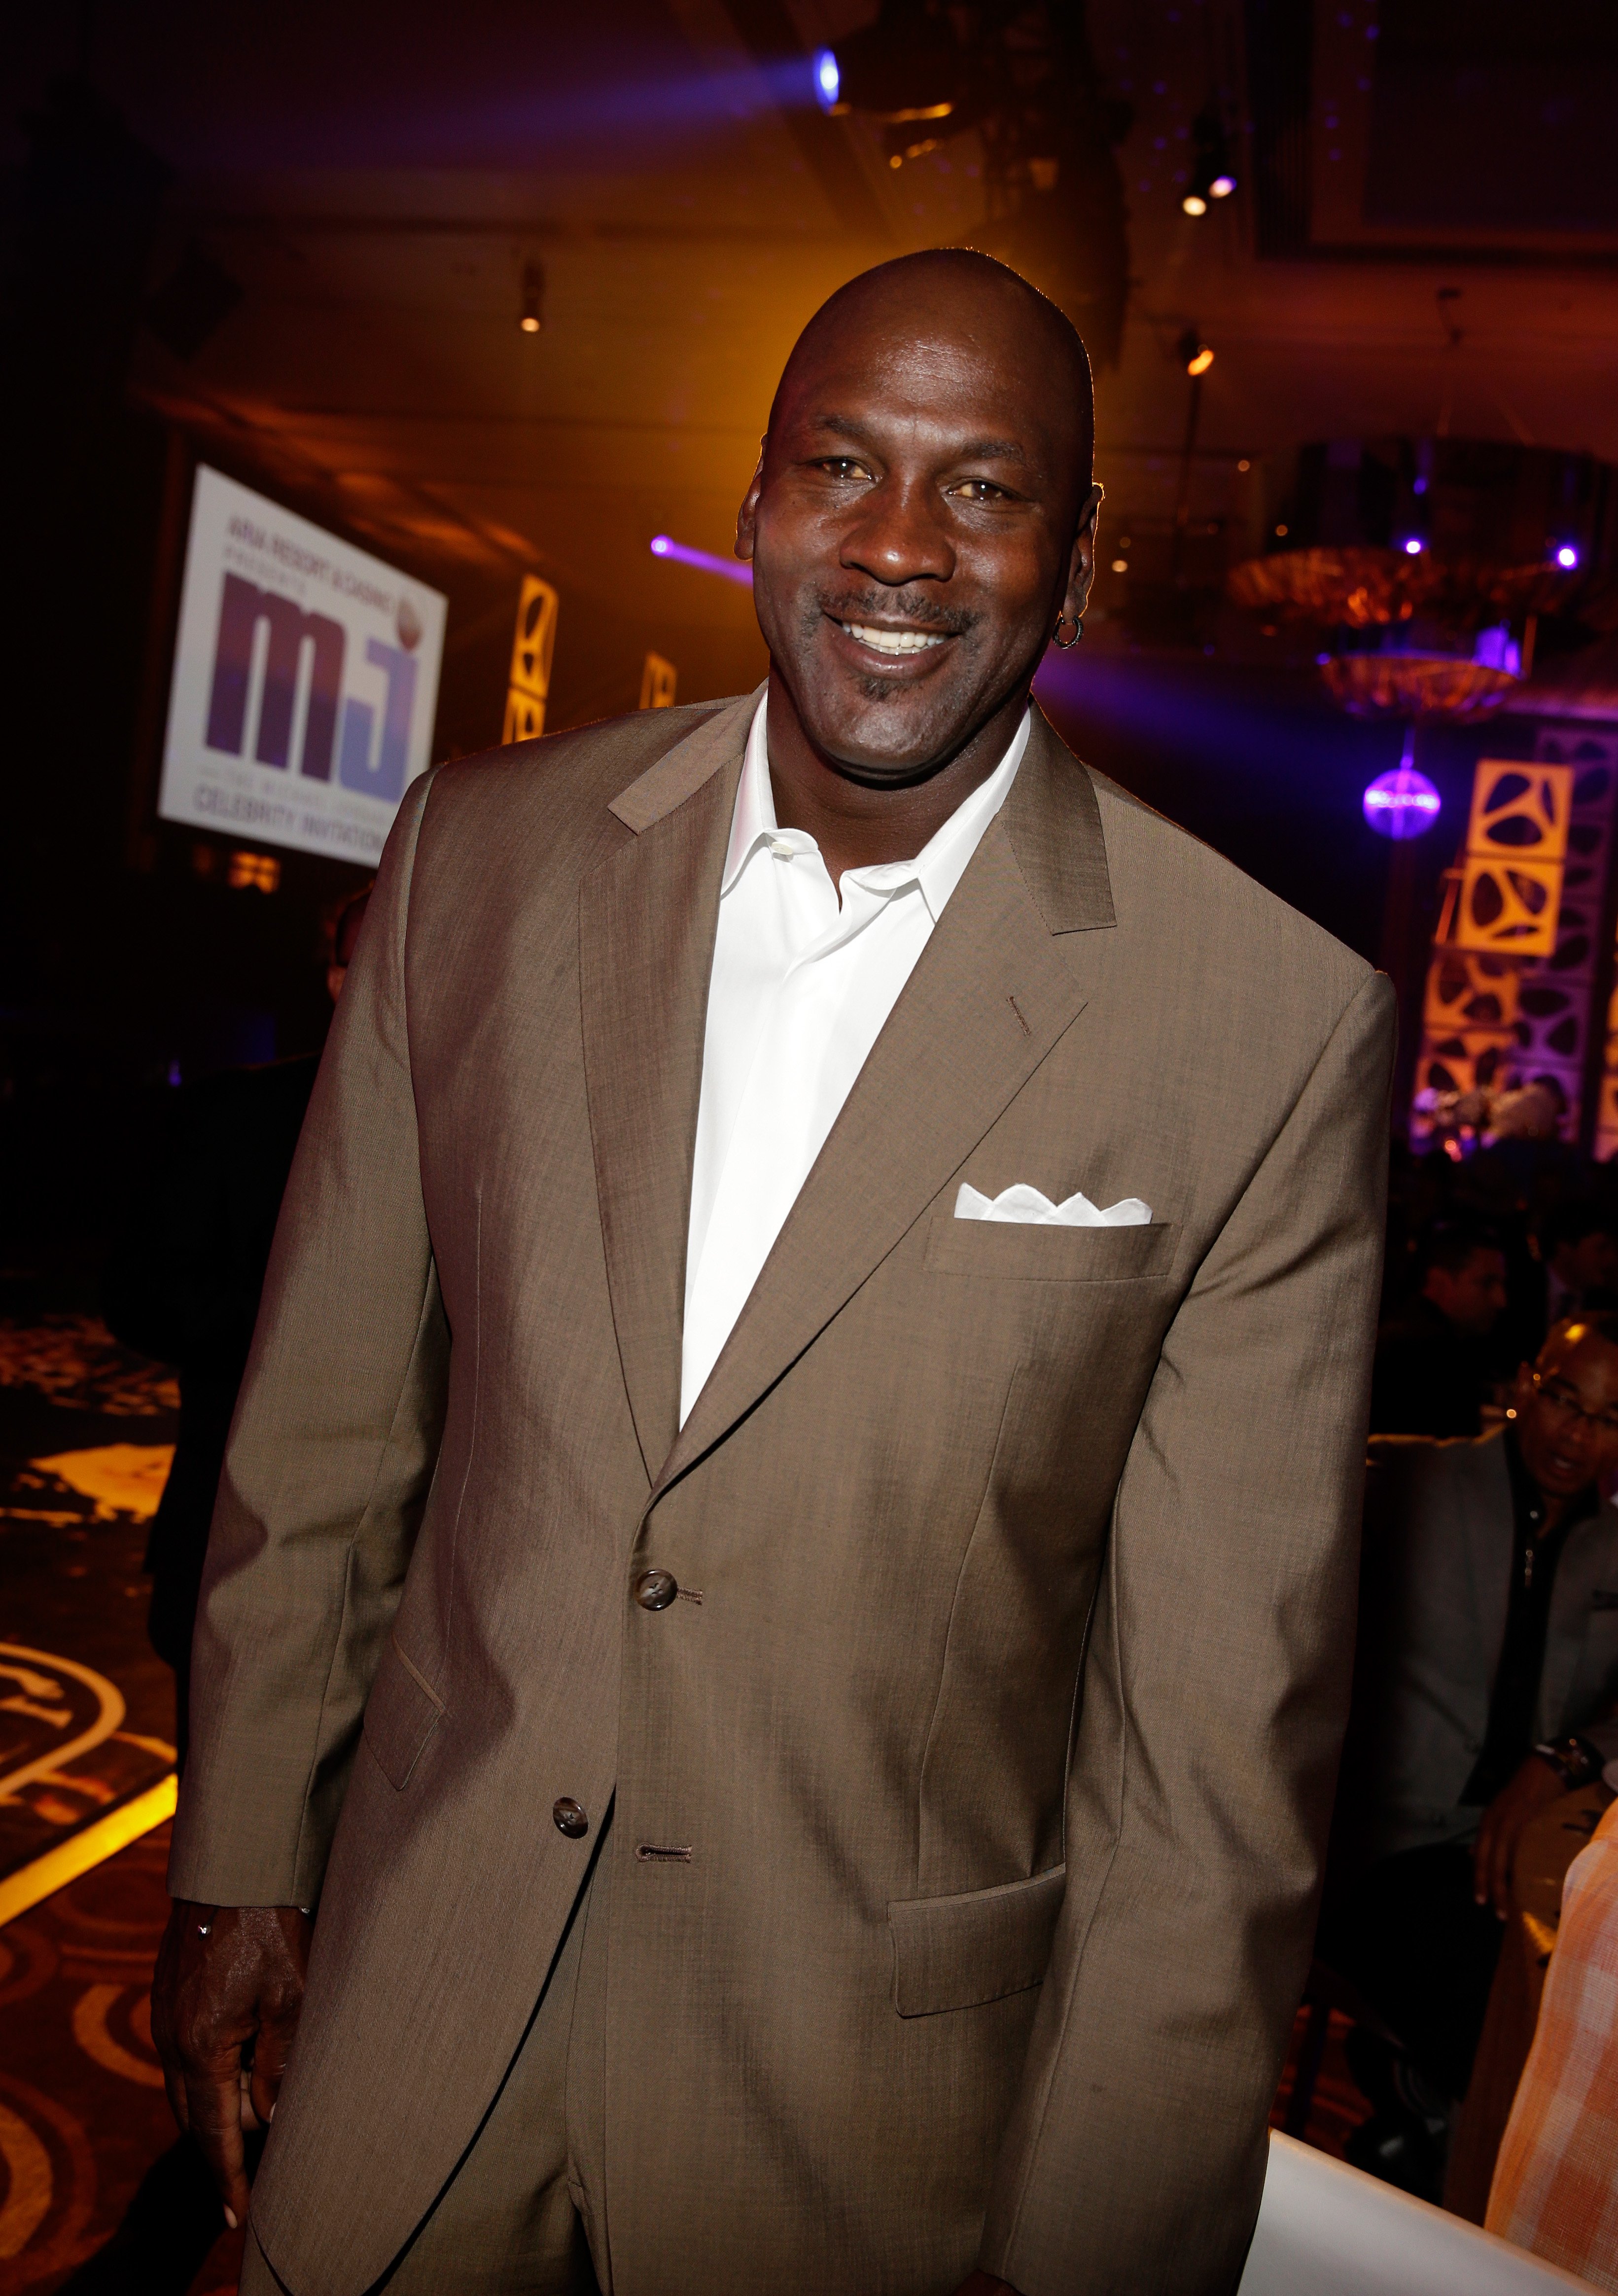  Michael Jordan attends the 13th annual Michael Jordan Celebrity Invitational gala at the ARIA Resort & Casino at CityCenter on April 4, 2014 in Las Vegas, Nevada. | Source: Getty Images